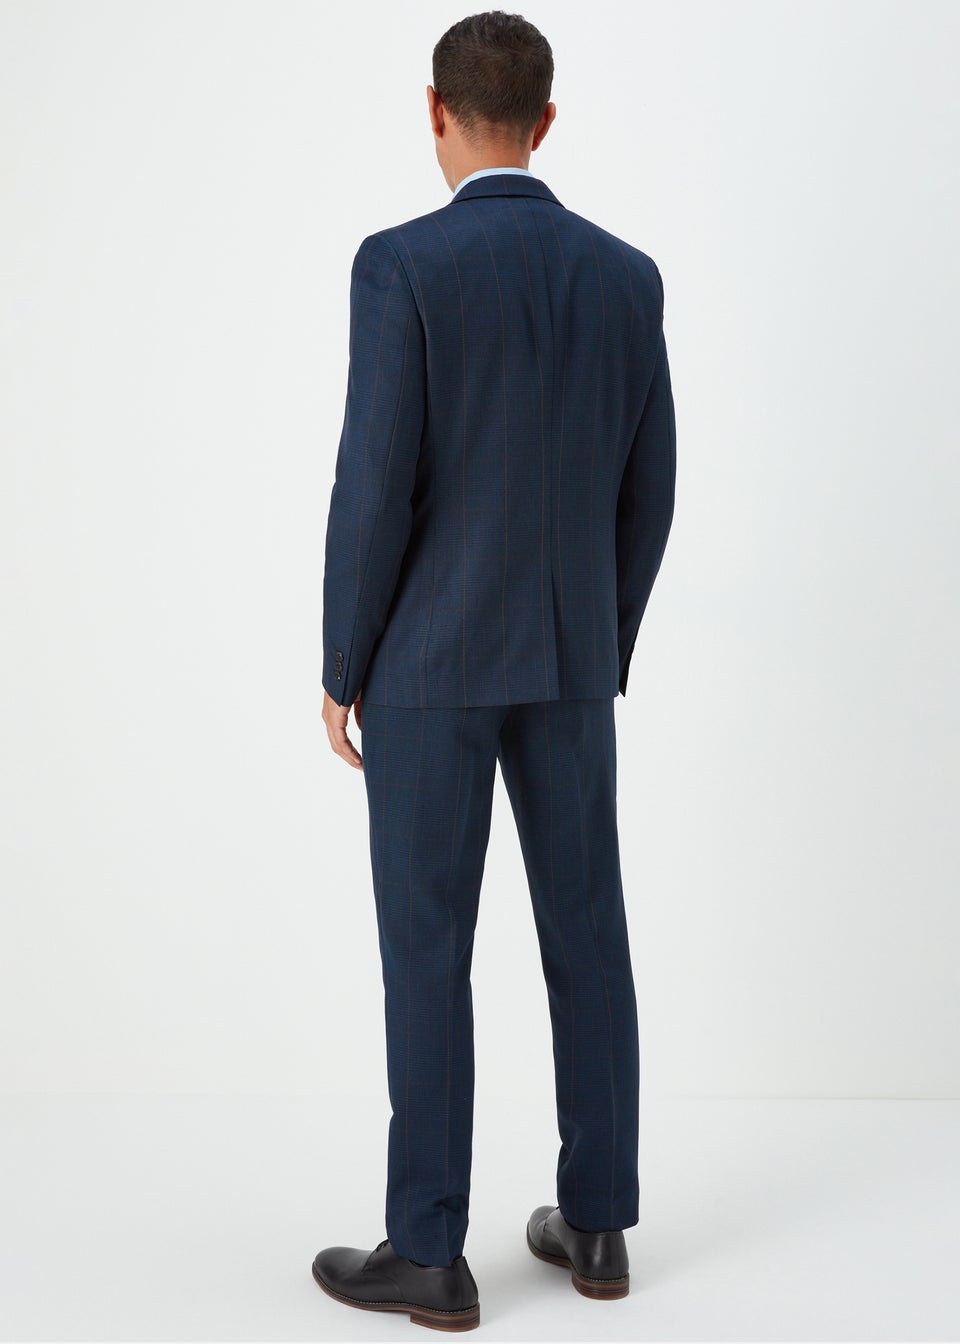 Men's Skinny Fit Suits | Fitted Trousers & Blazers - Matalan